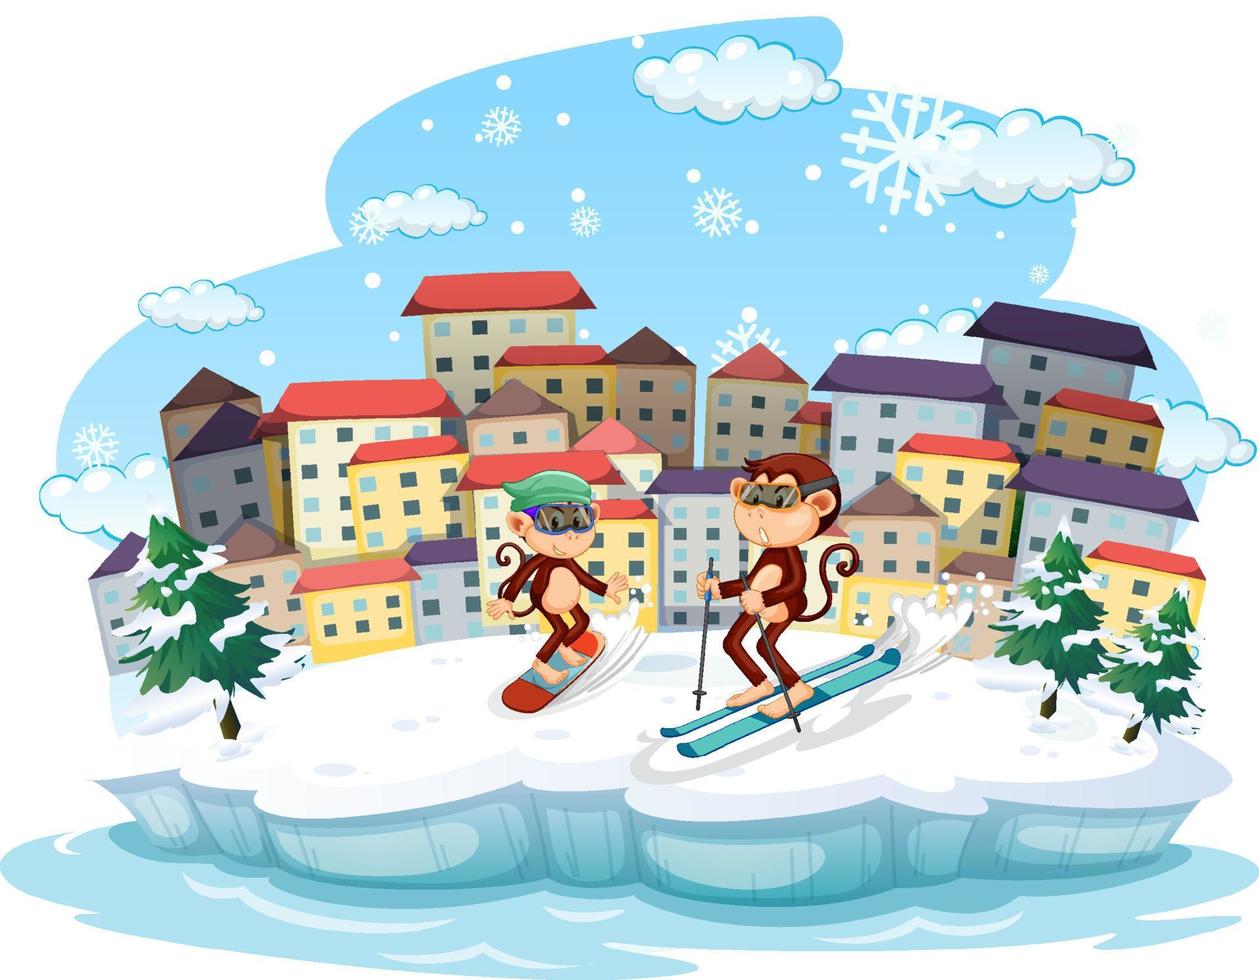 Monkey skiing in the snow at daytime scene vector